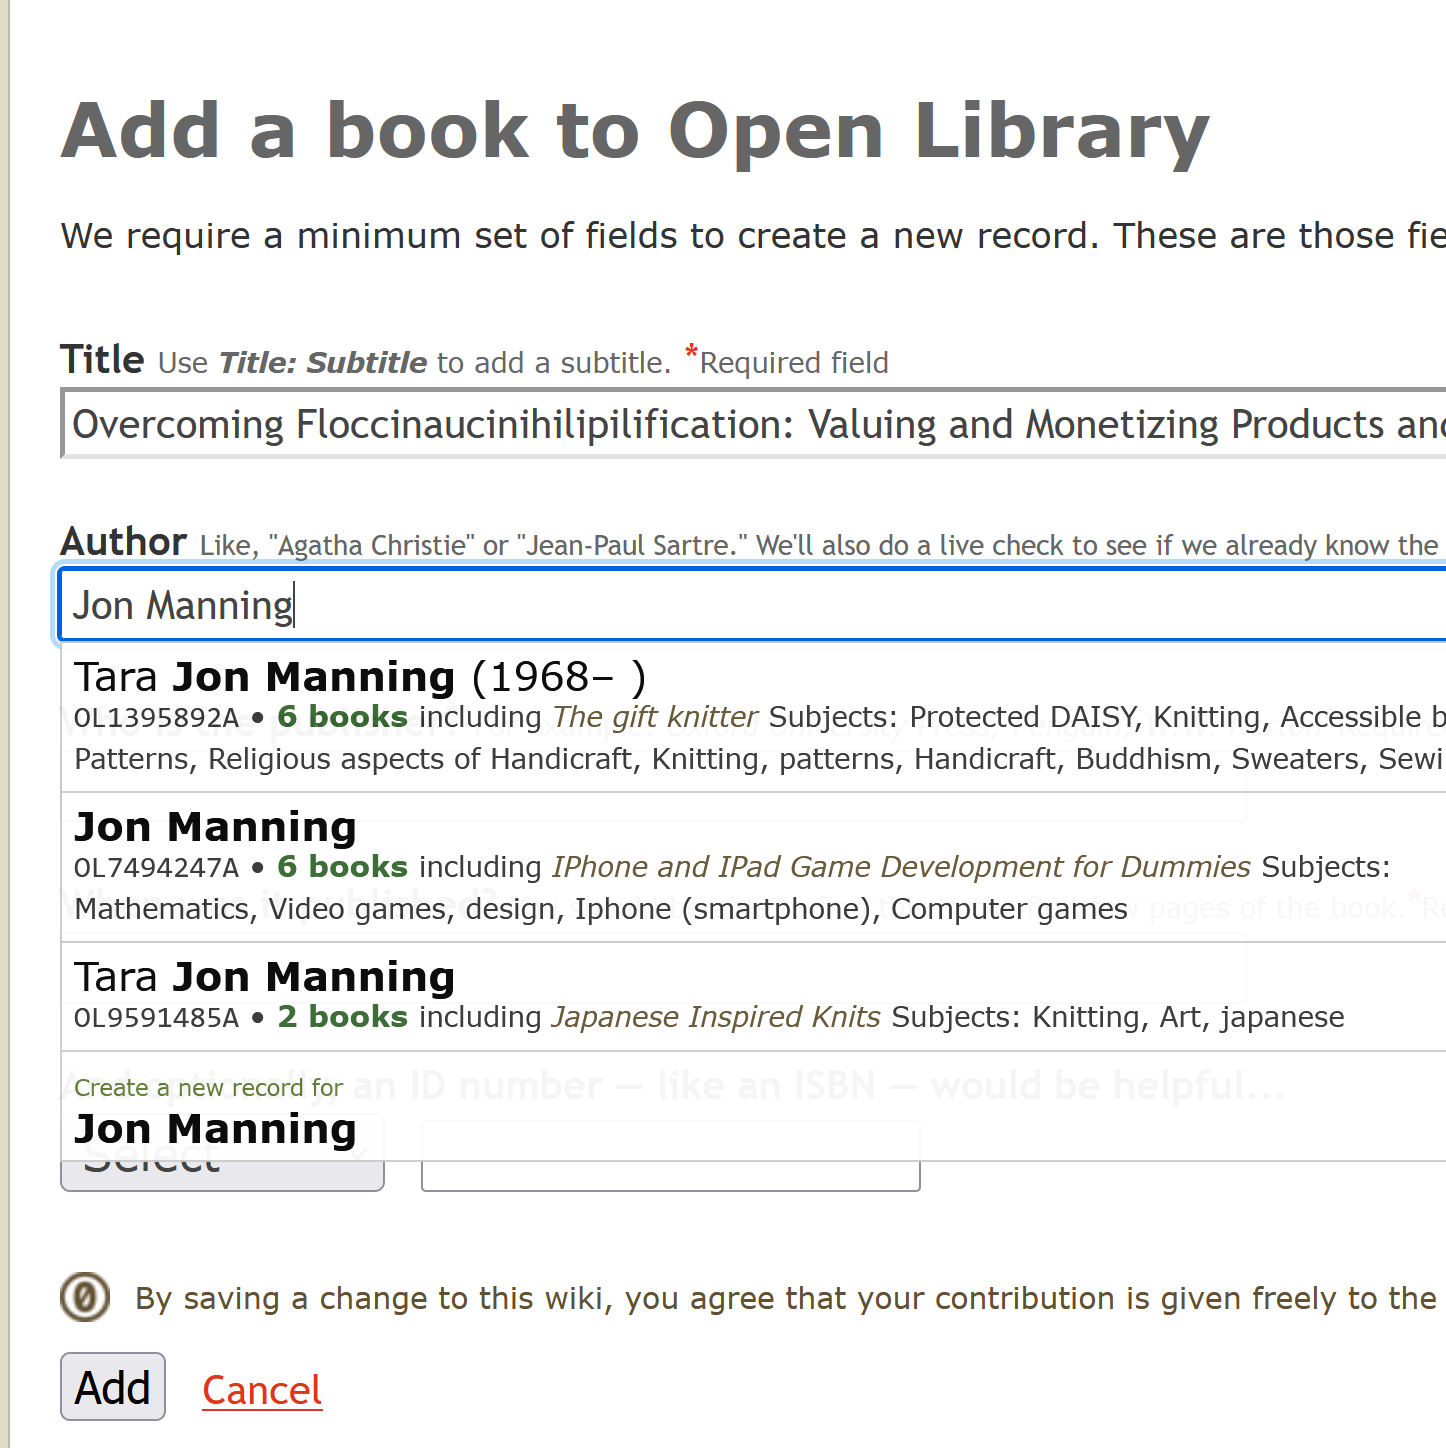 Adding a Book to Open Library